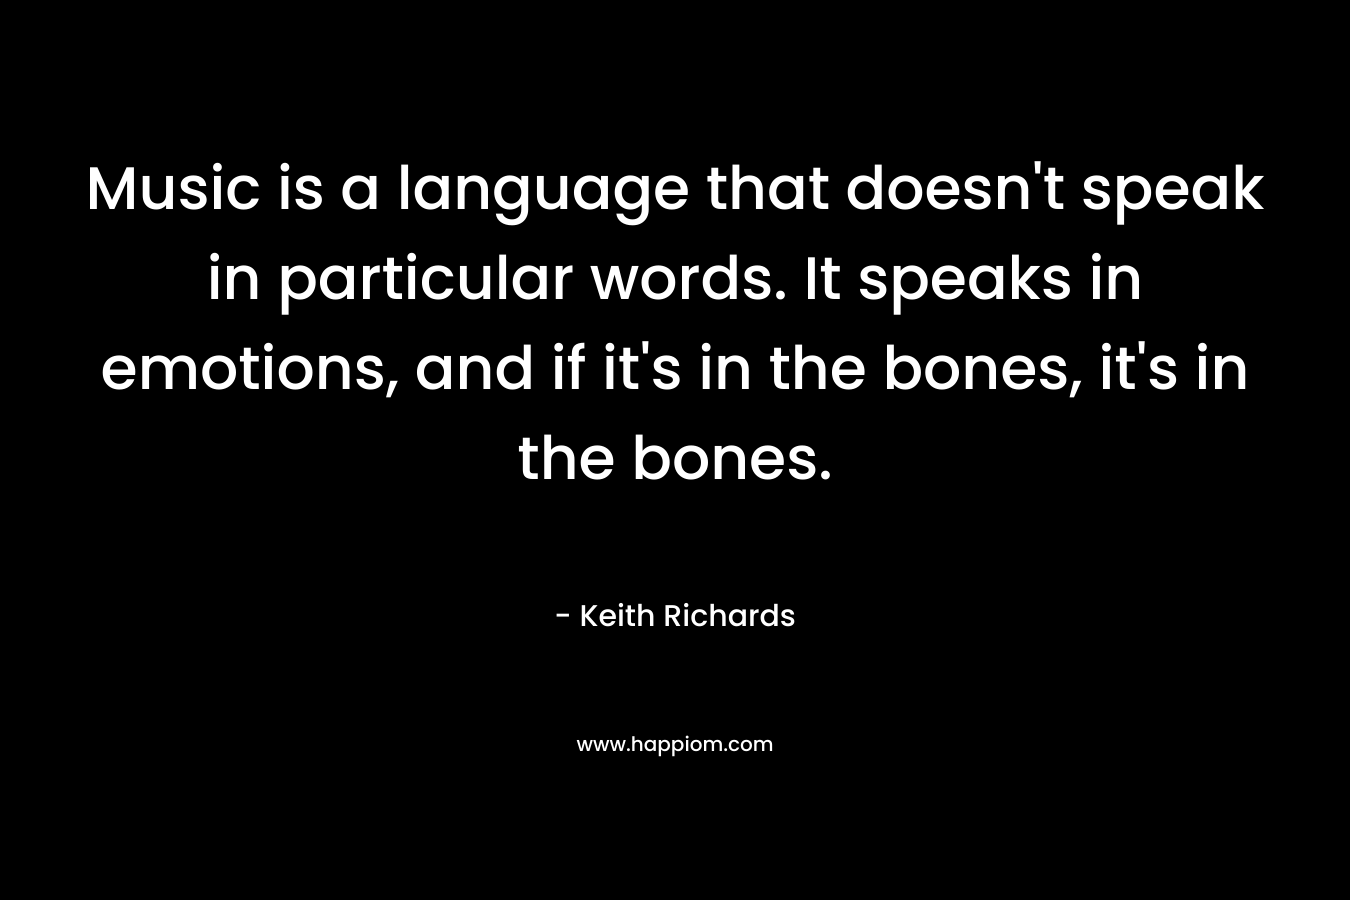 Music is a language that doesn't speak in particular words. It speaks in emotions, and if it's in the bones, it's in the bones.